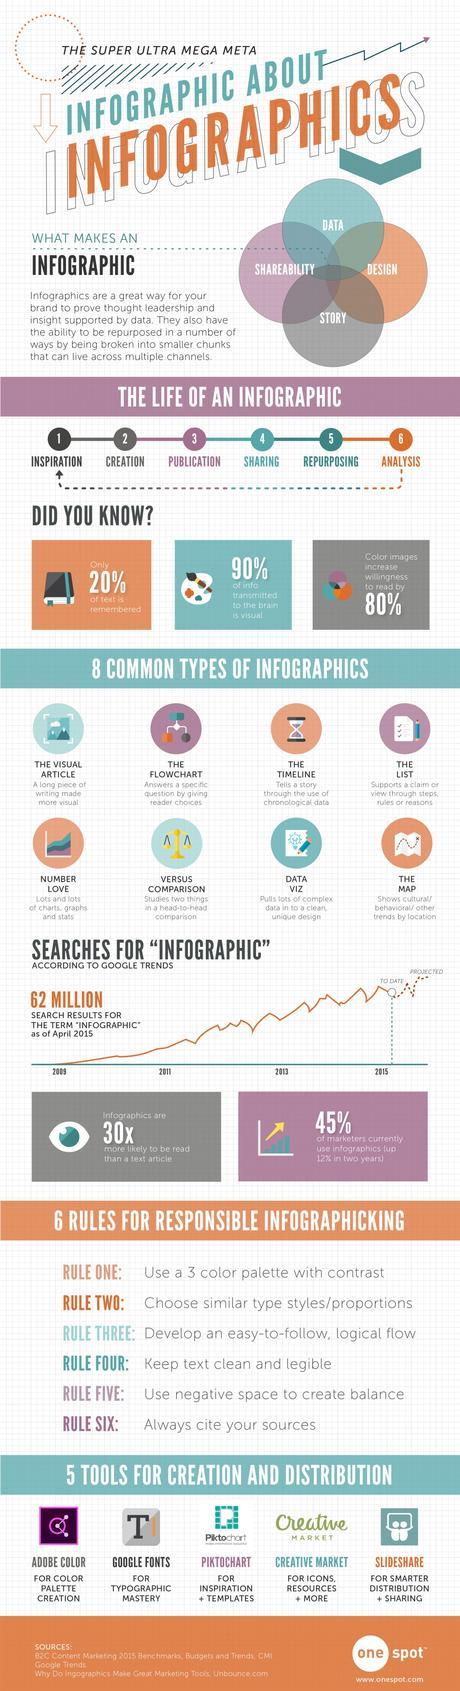 Why Infographics Are Essential for Content Marketing - Computergeekblog